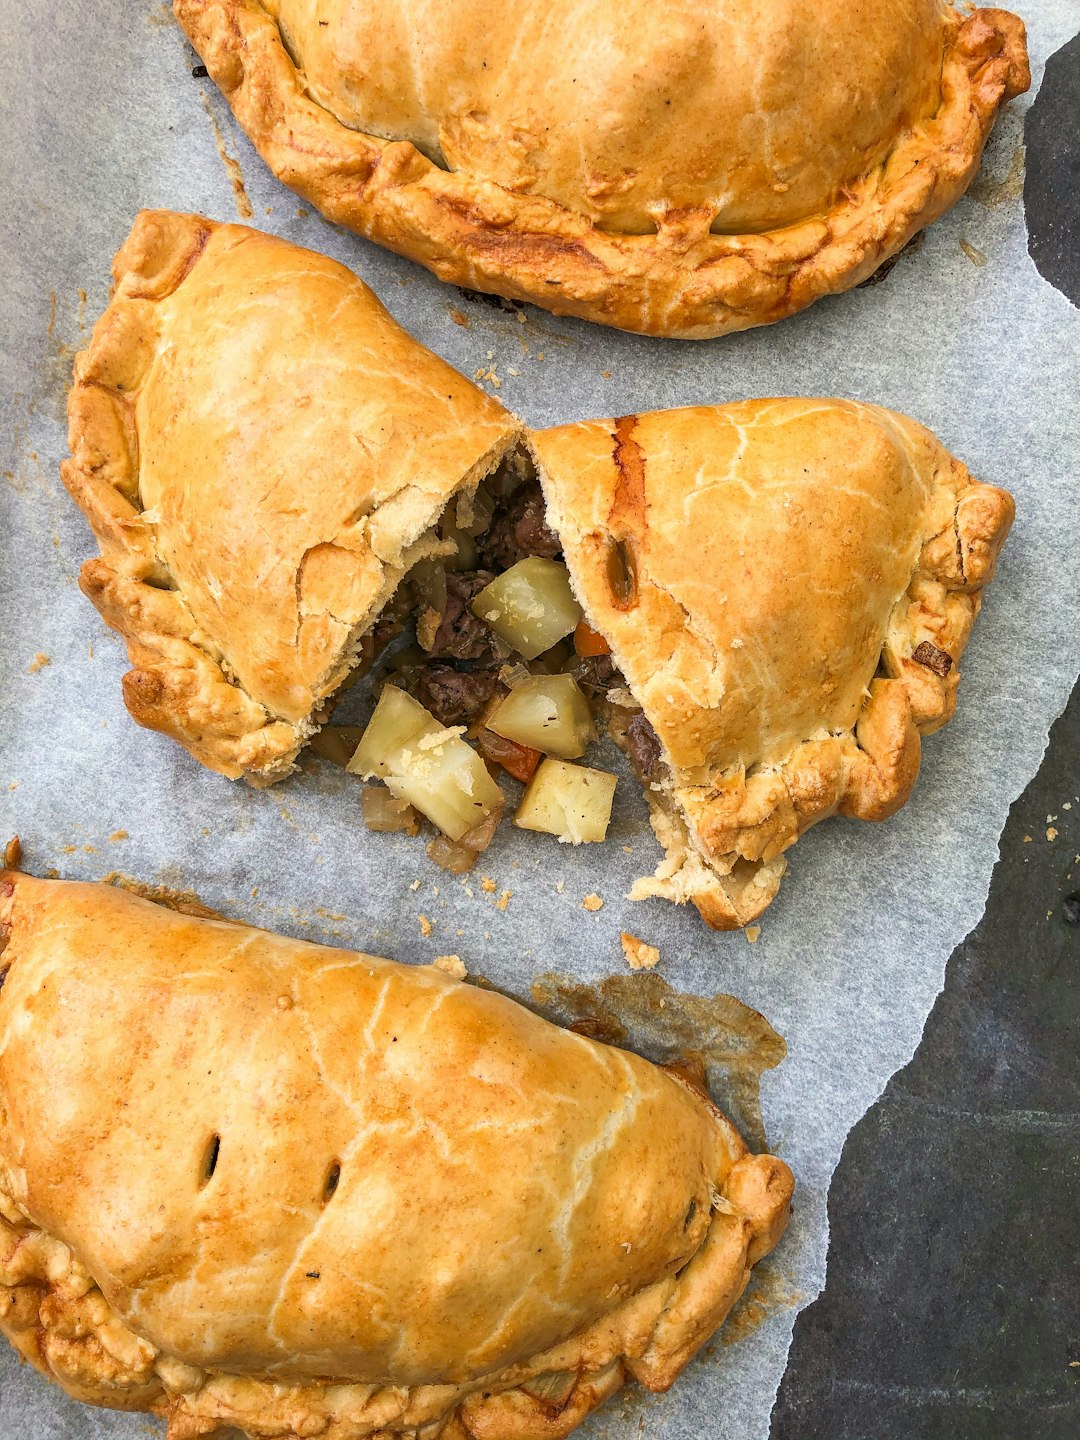 The Cornish Pasty - a taste of Cornwall